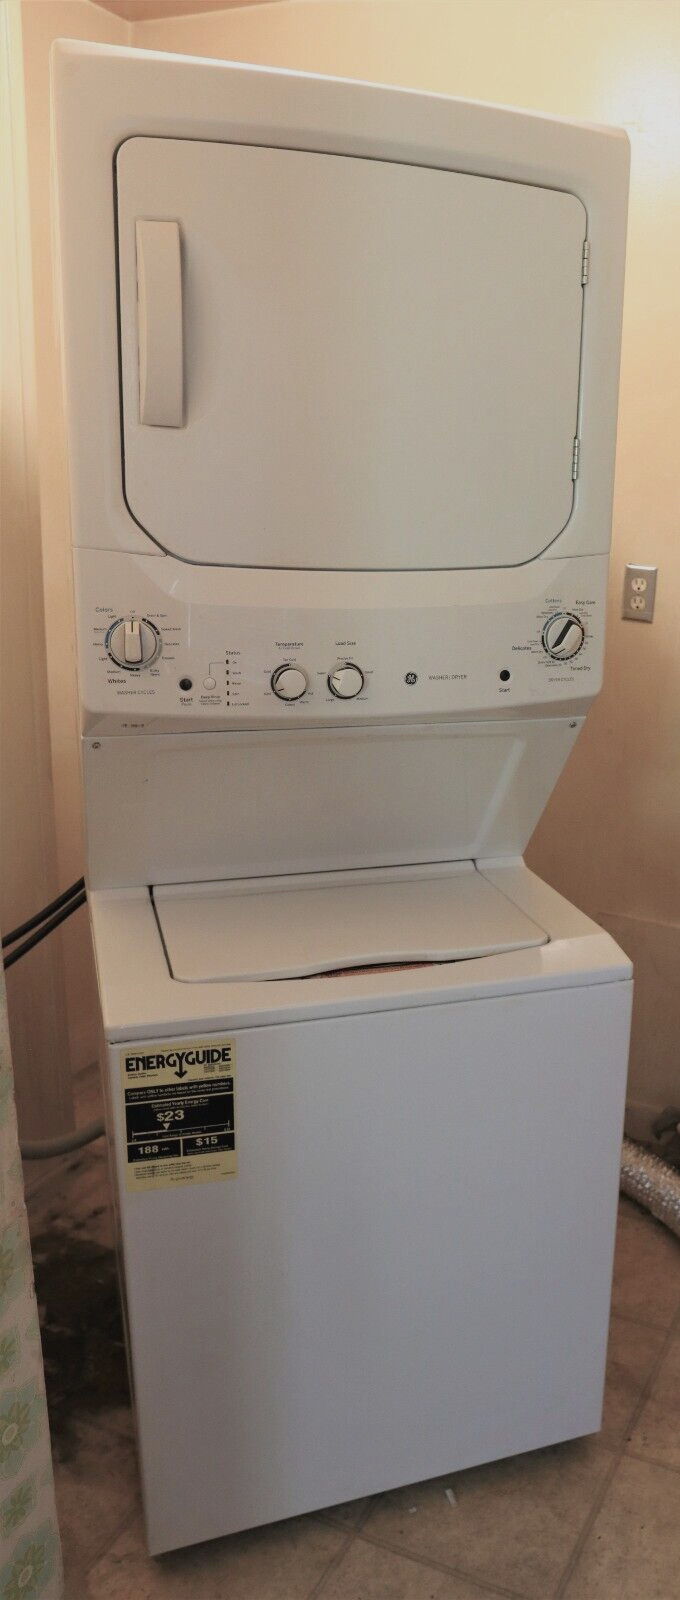 GE Washer/Dryer Combo (Gas) - Local Pickup Only